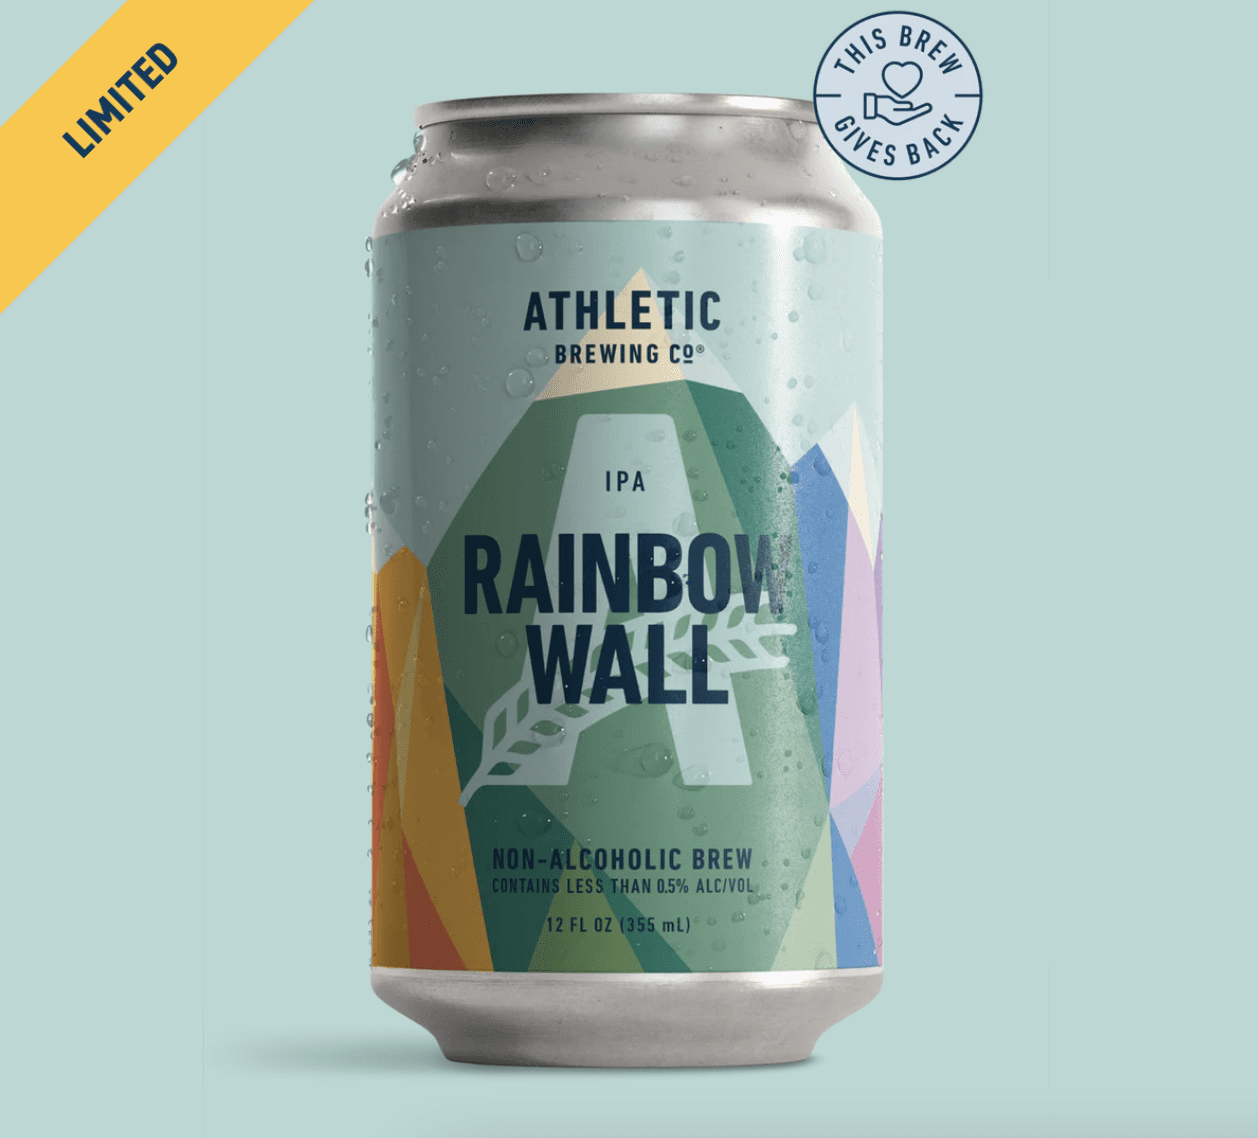 Photo of Athletic Brewing Company's Rainbow Wall beer can.